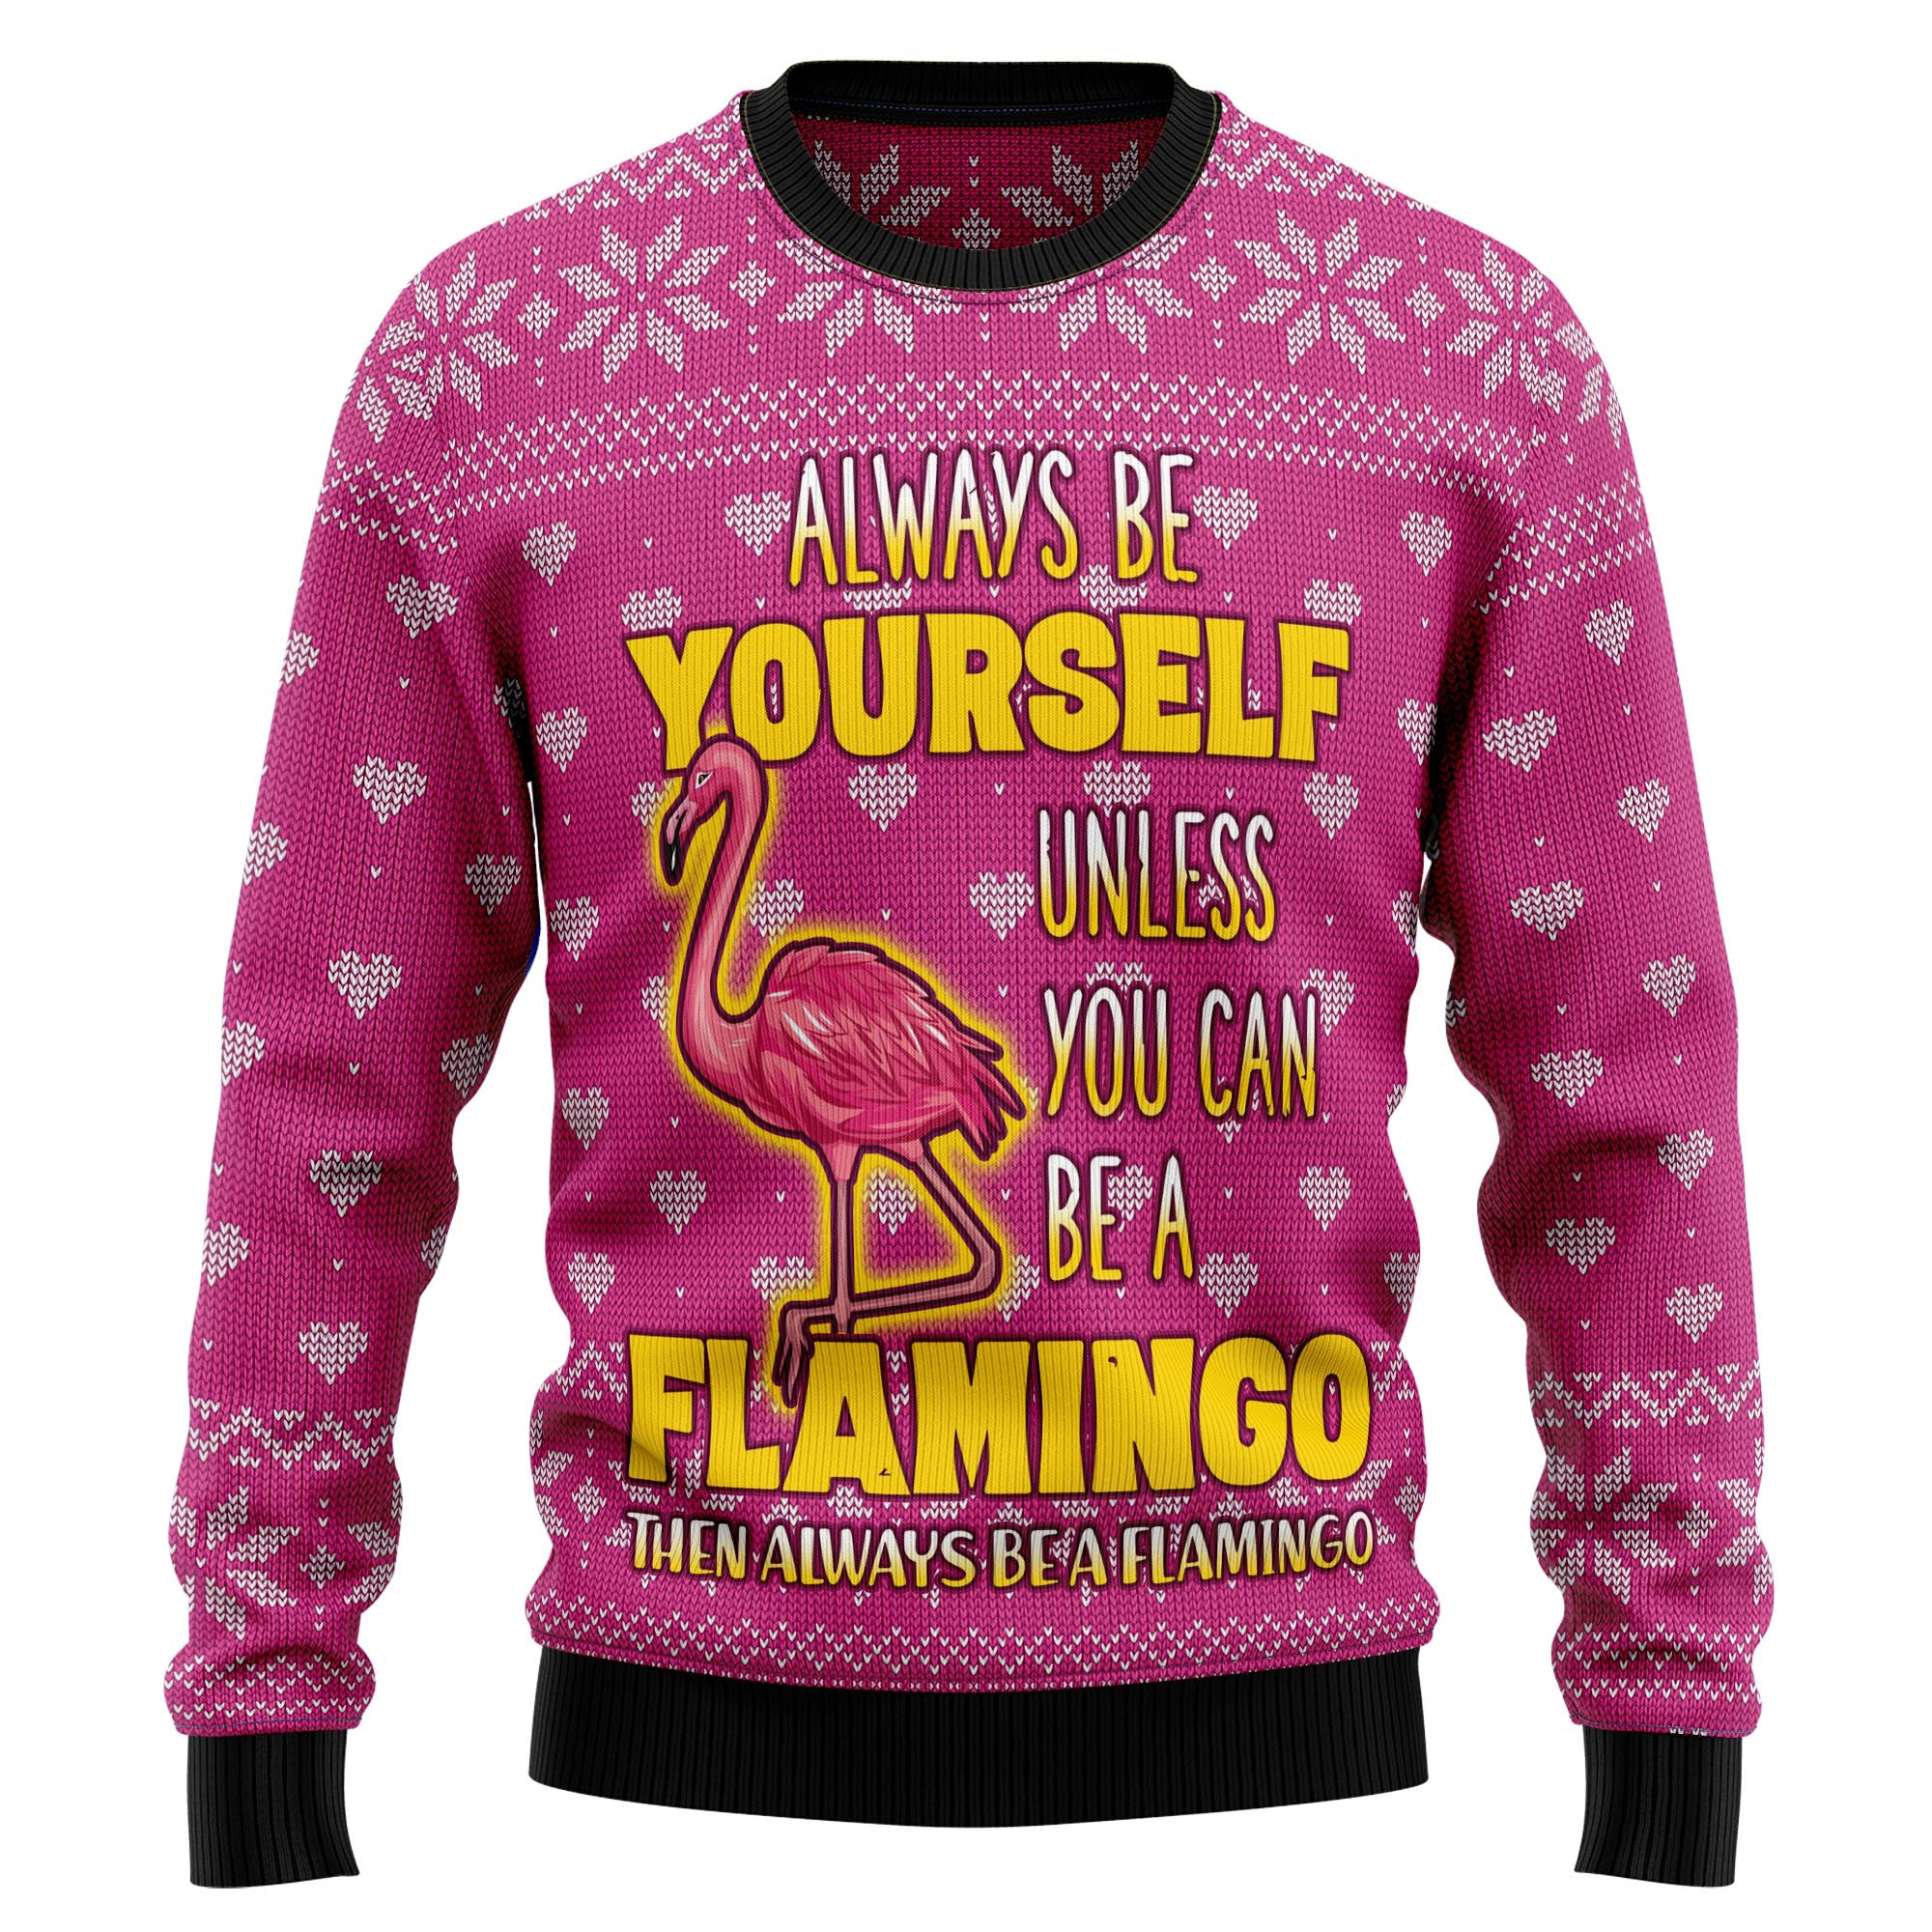 Be A Flamingo Ugly Christmas Sweater, Ugly Sweater For Men Women, Holiday Sweater